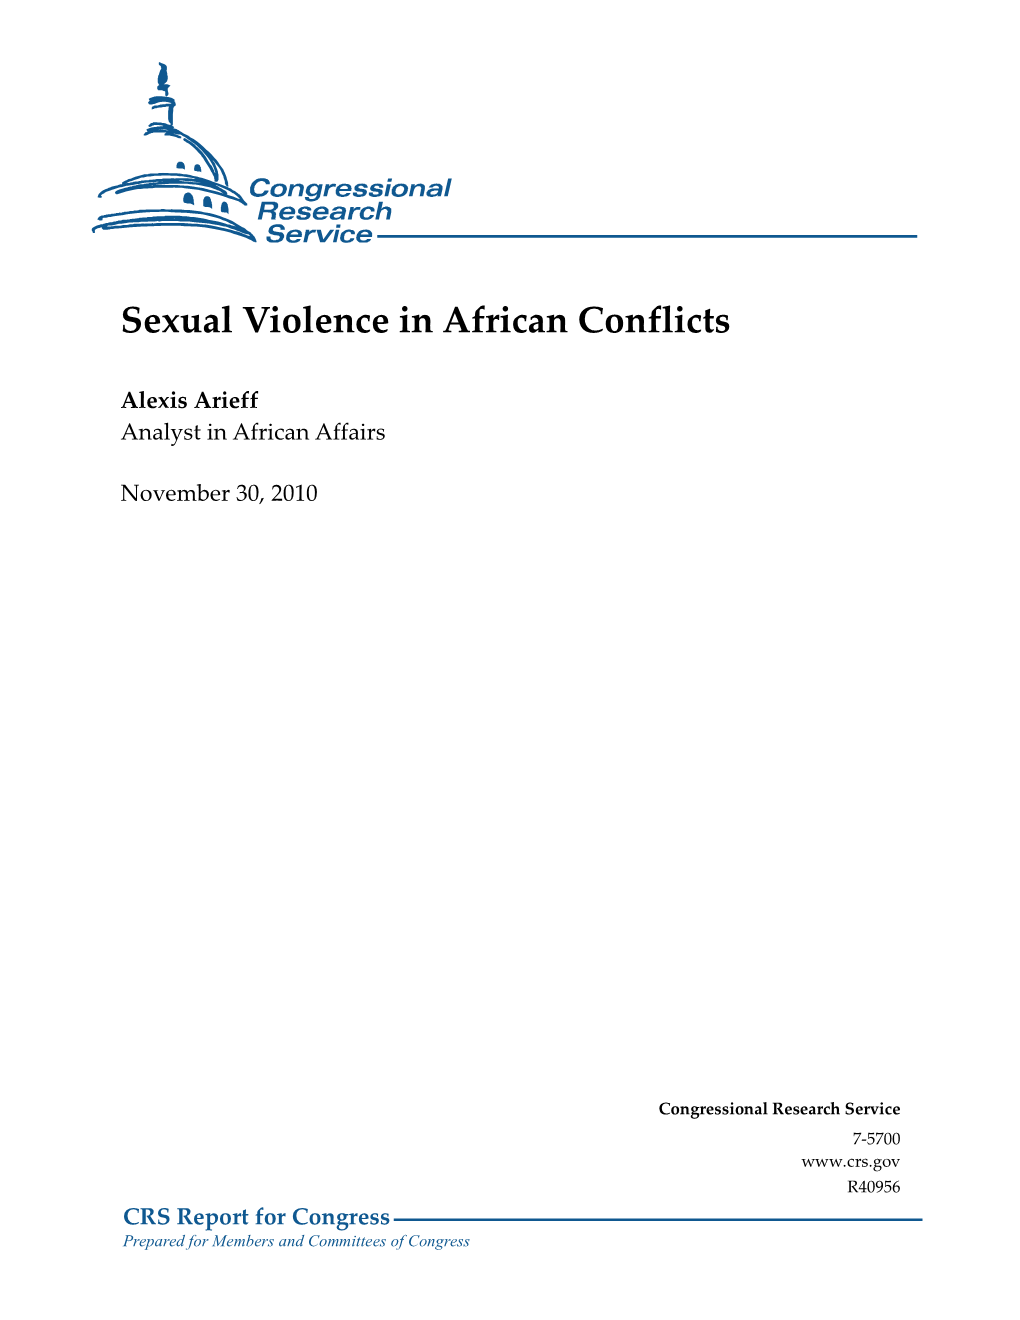 Sexual Violence in African Conflicts